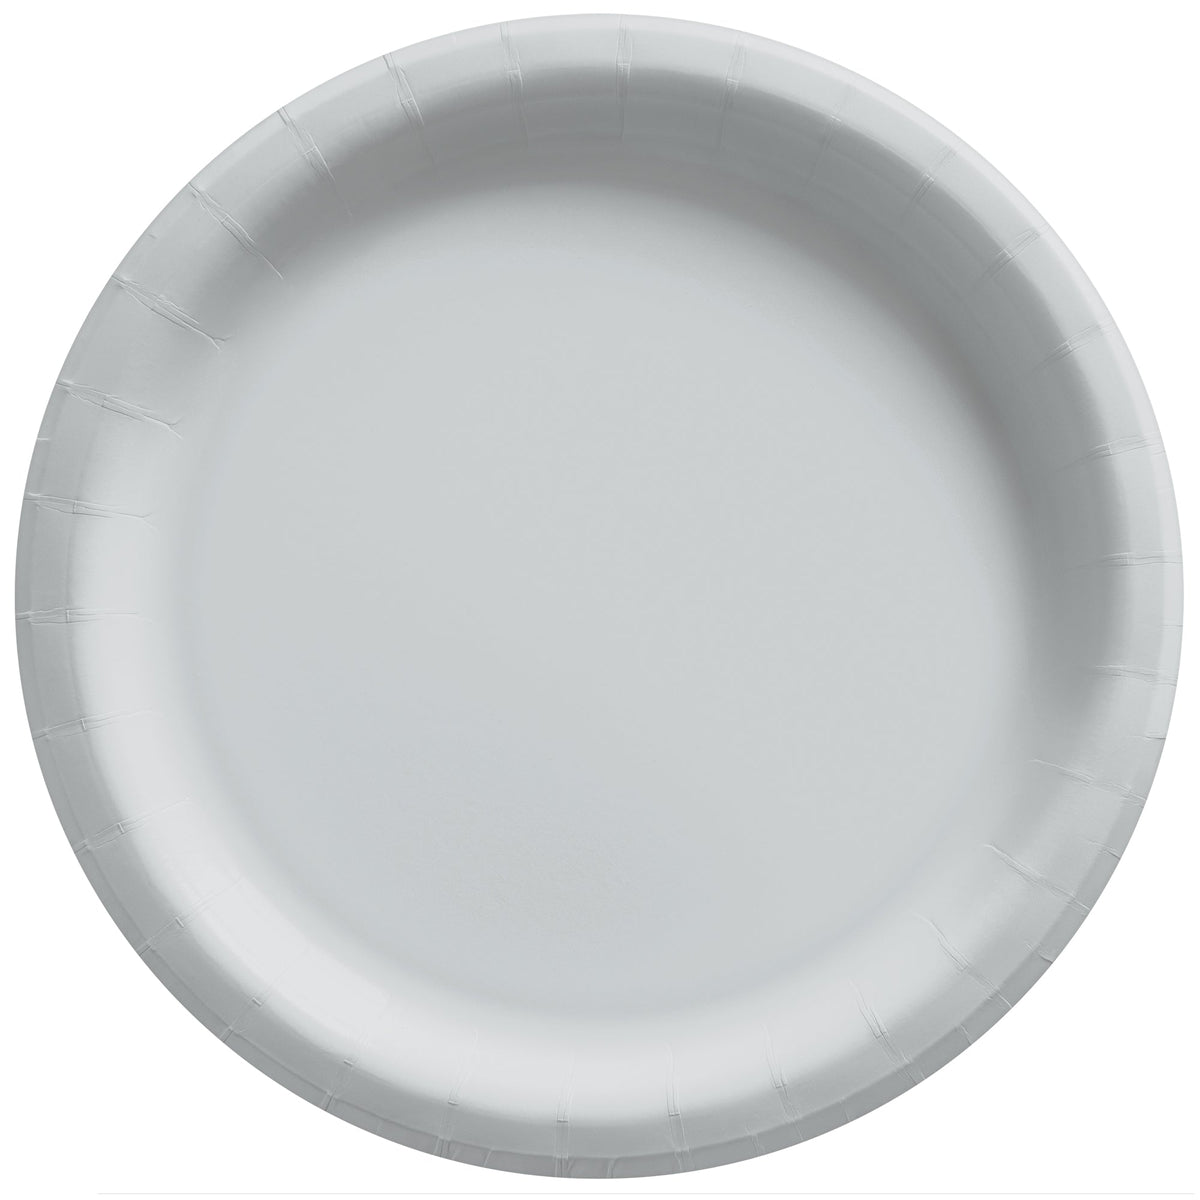 Silver 10" Round Paper Plates, 20 count